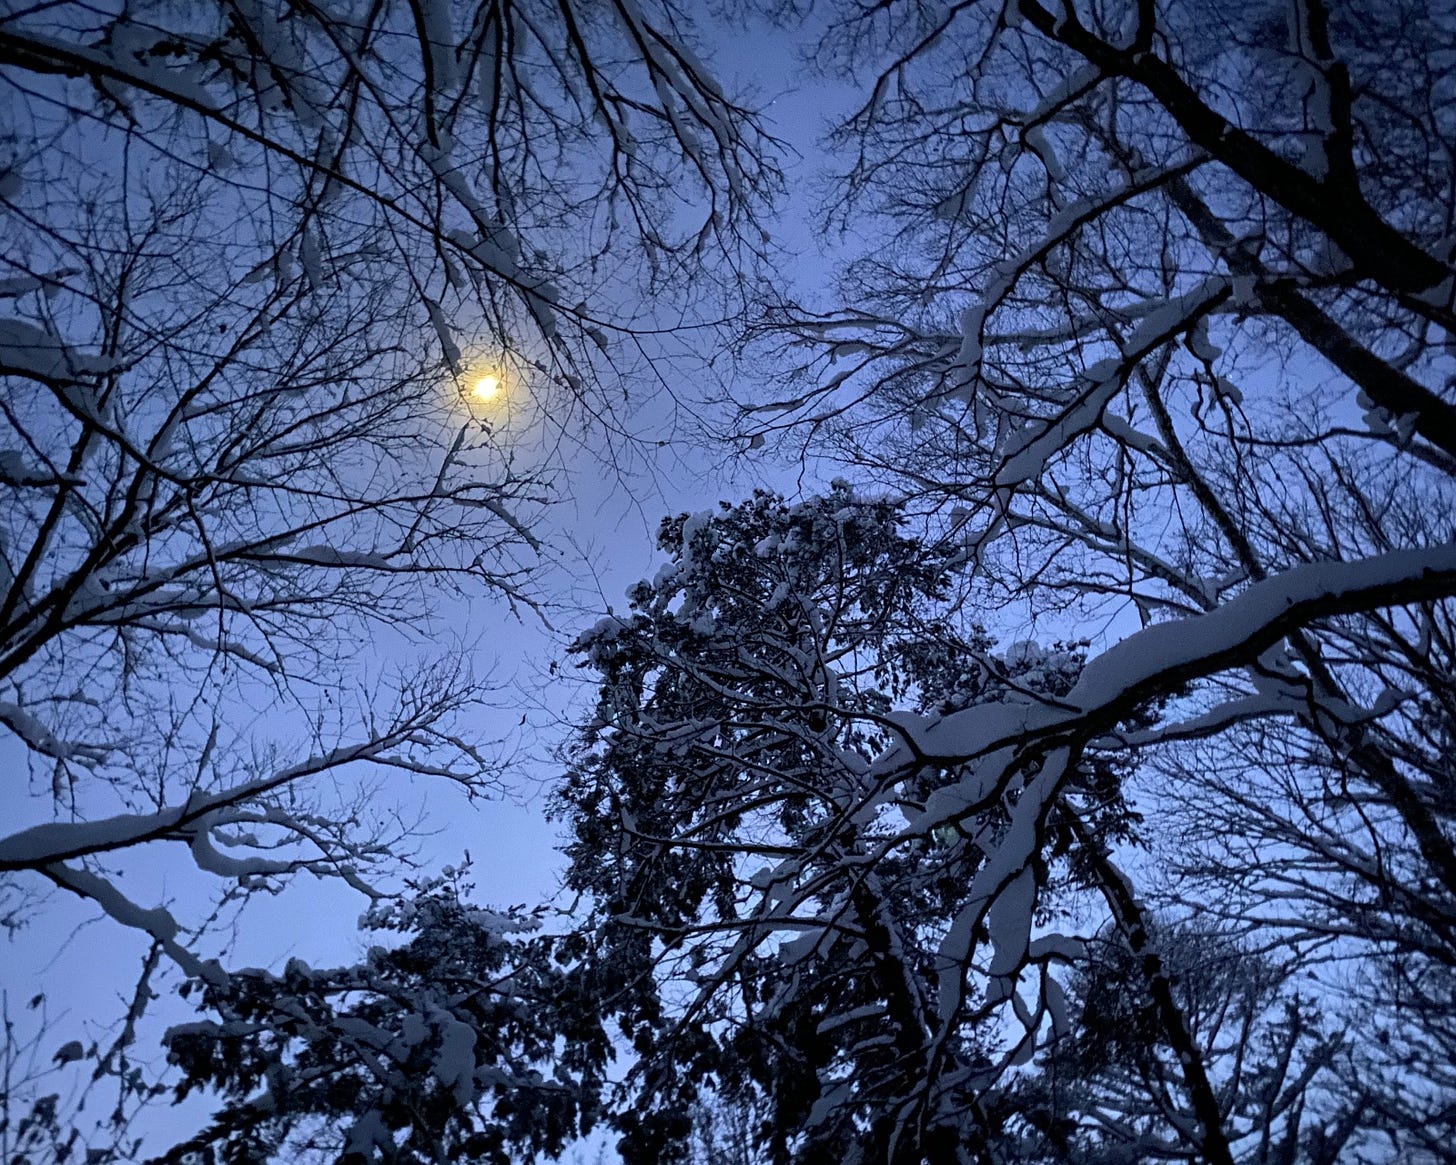 Winter night sky looking through the snowy trees at the full moon.